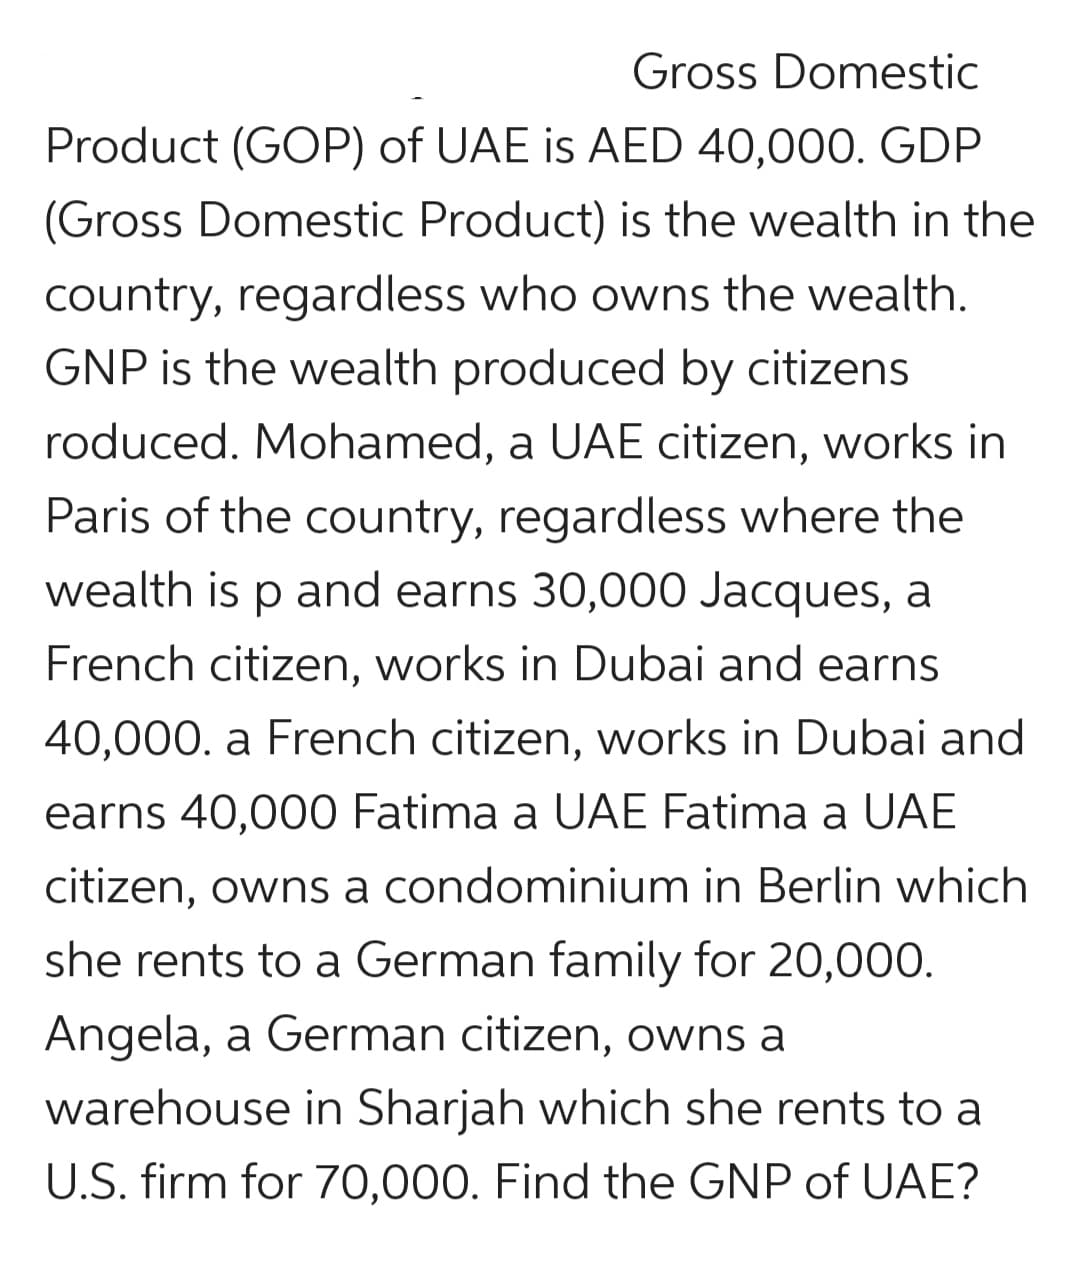 Gross Domestic
Product (GOP) of UAE is AED 40,000. GDP
(Gross Domestic Product) is the wealth in the
country, regardless who owns the wealth.
GNP is the wealth produced by citizens
roduced. Mohamed, a UAE citizen, works in
Paris of the country, regardless where the
wealth is p and earns 30,000 Jacques, a
French citizen, works in Dubai and earns
40,000. a French citizen, works in Dubai and
earns 40,000 Fatima a UAE Fatima a UAE
citizen, owns a condominium in Berlin which
she rents to a German family for 20,000.
Angela, a German citizen, owns a
warehouse in Sharjah which she rents to a
U.S. firm for 70,000. Find the GNP of UAE?
